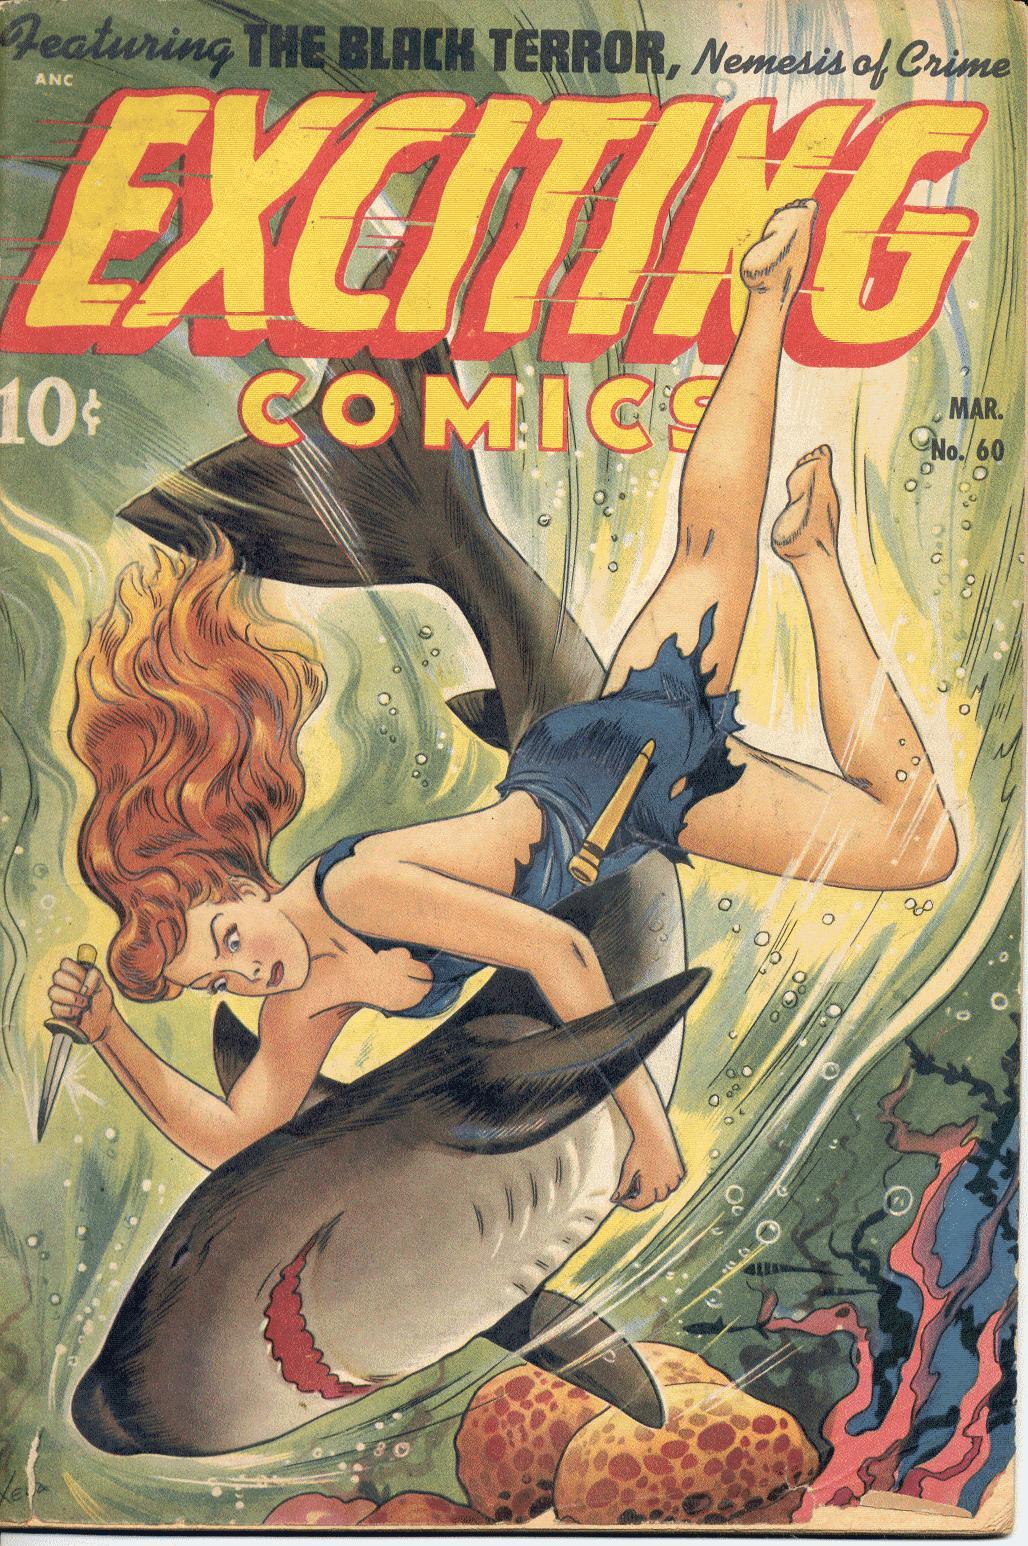 comicbookcovers:
“Exciting Comics #60, March 1948, cover by Alex Schomburg
”